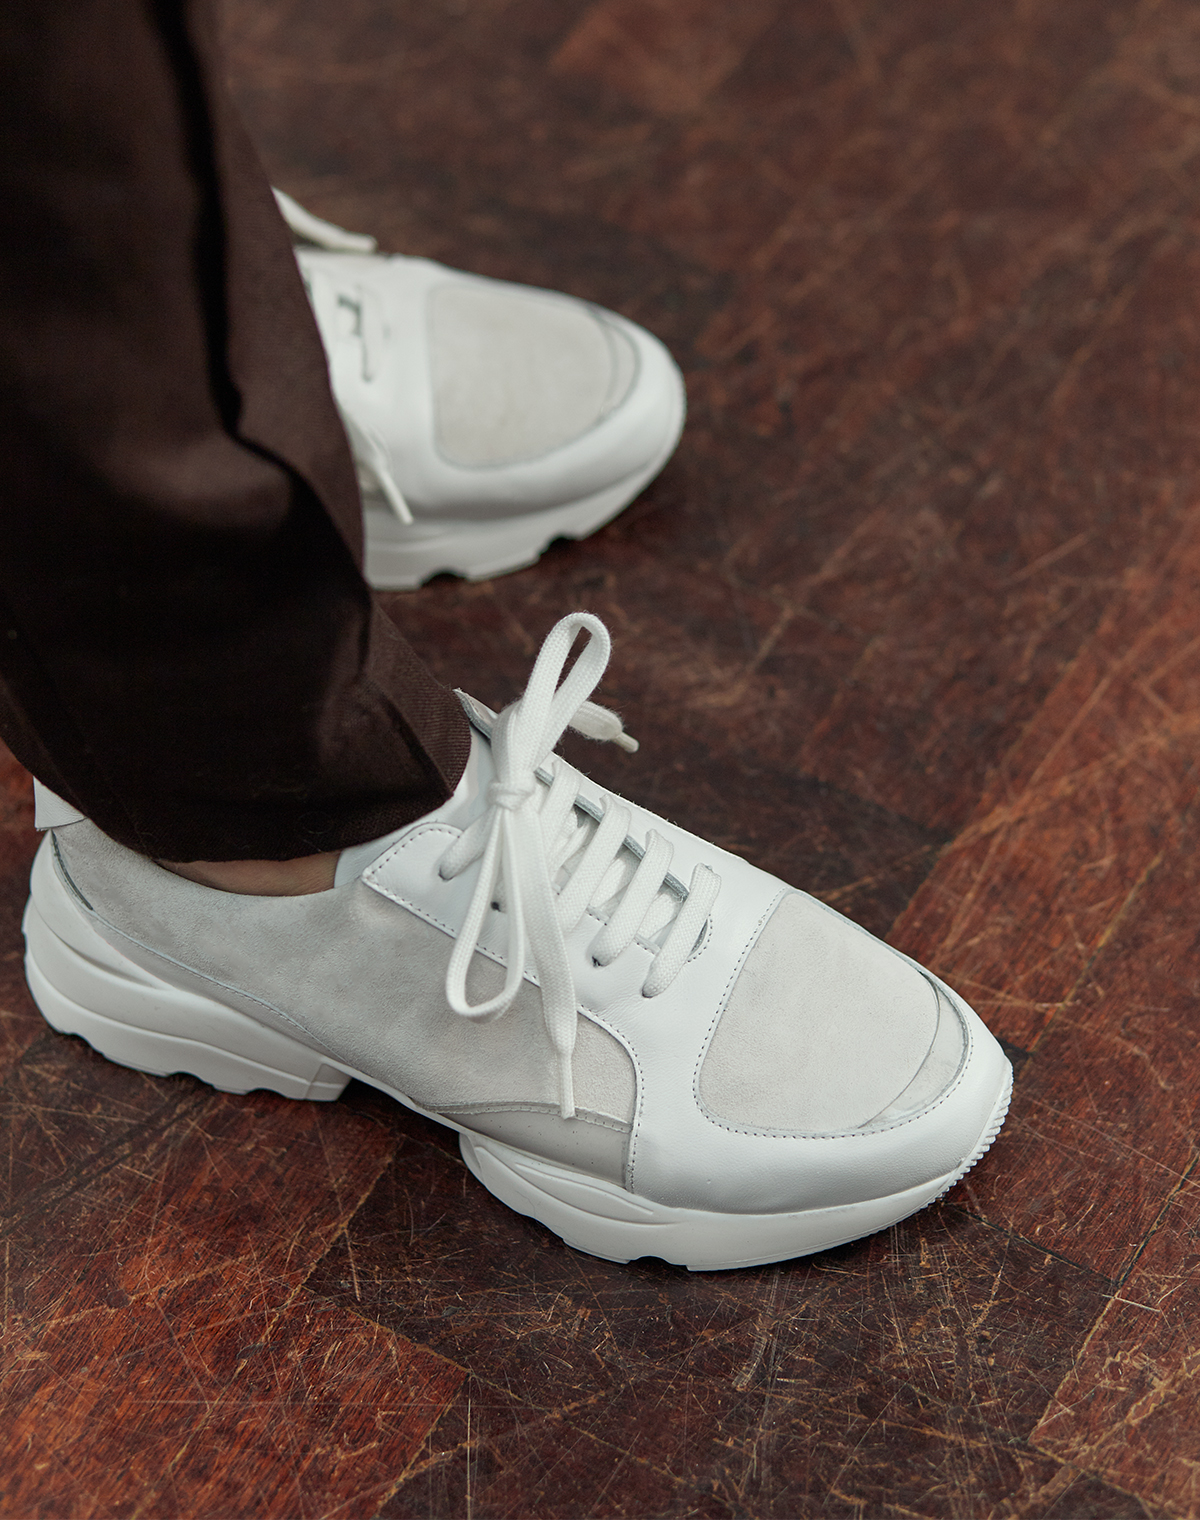 Bedra White Leather Suede Sneakers 